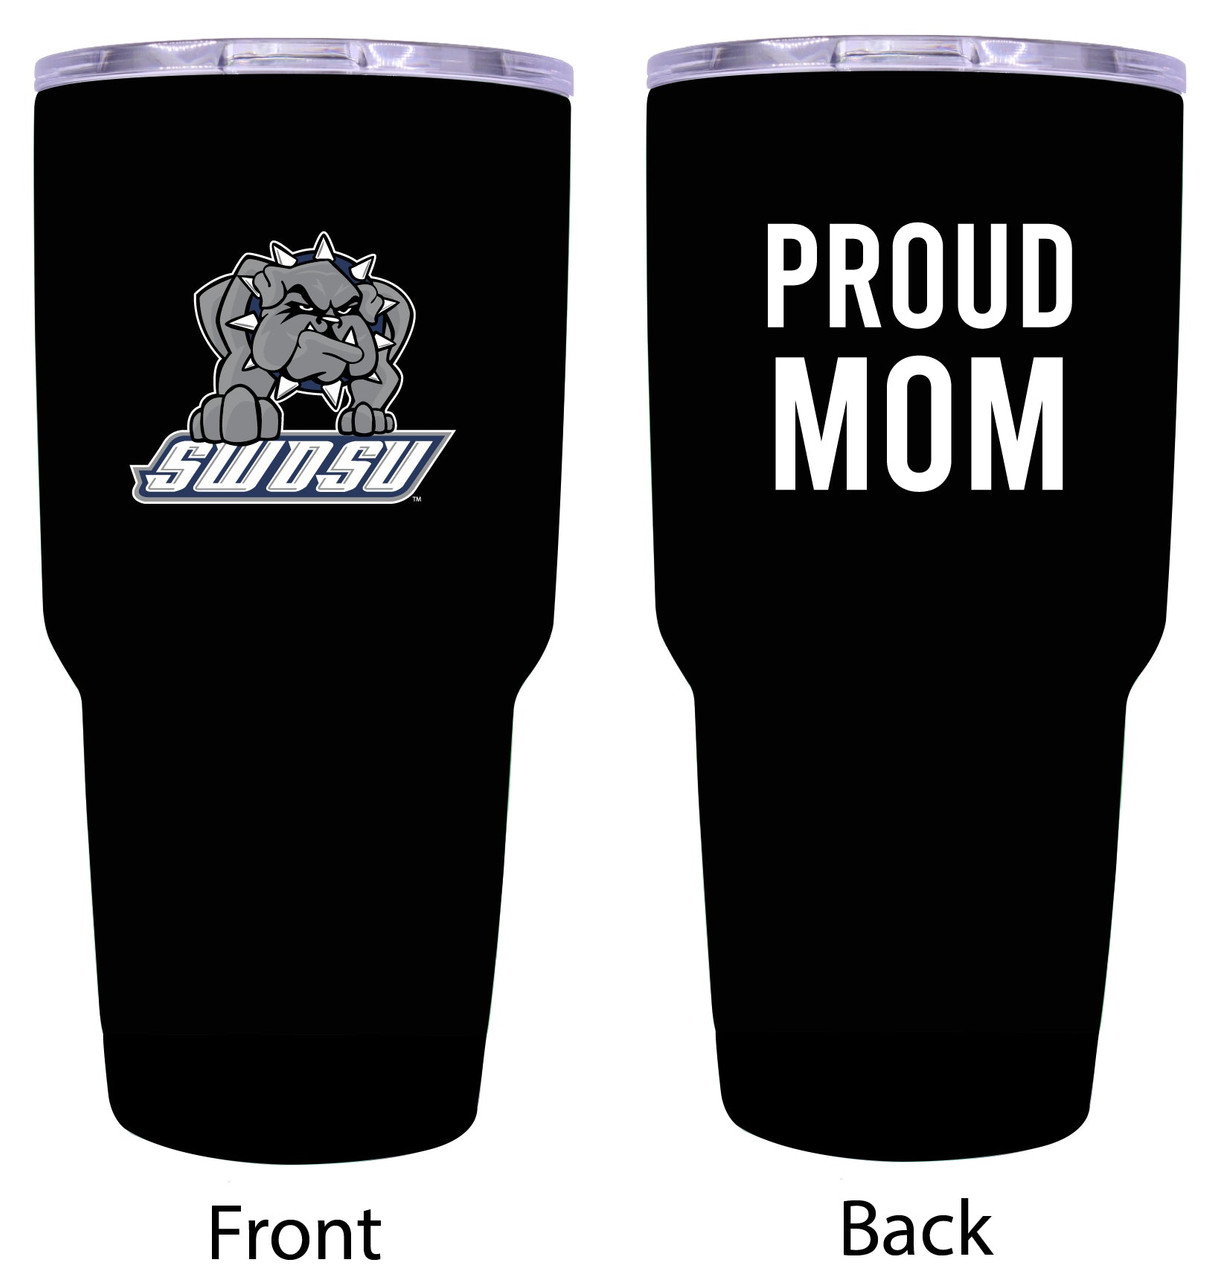 Southwestern Oklahoma State University Proud Mom 24 oz Insulated Stainless Steel Tumblers Black.